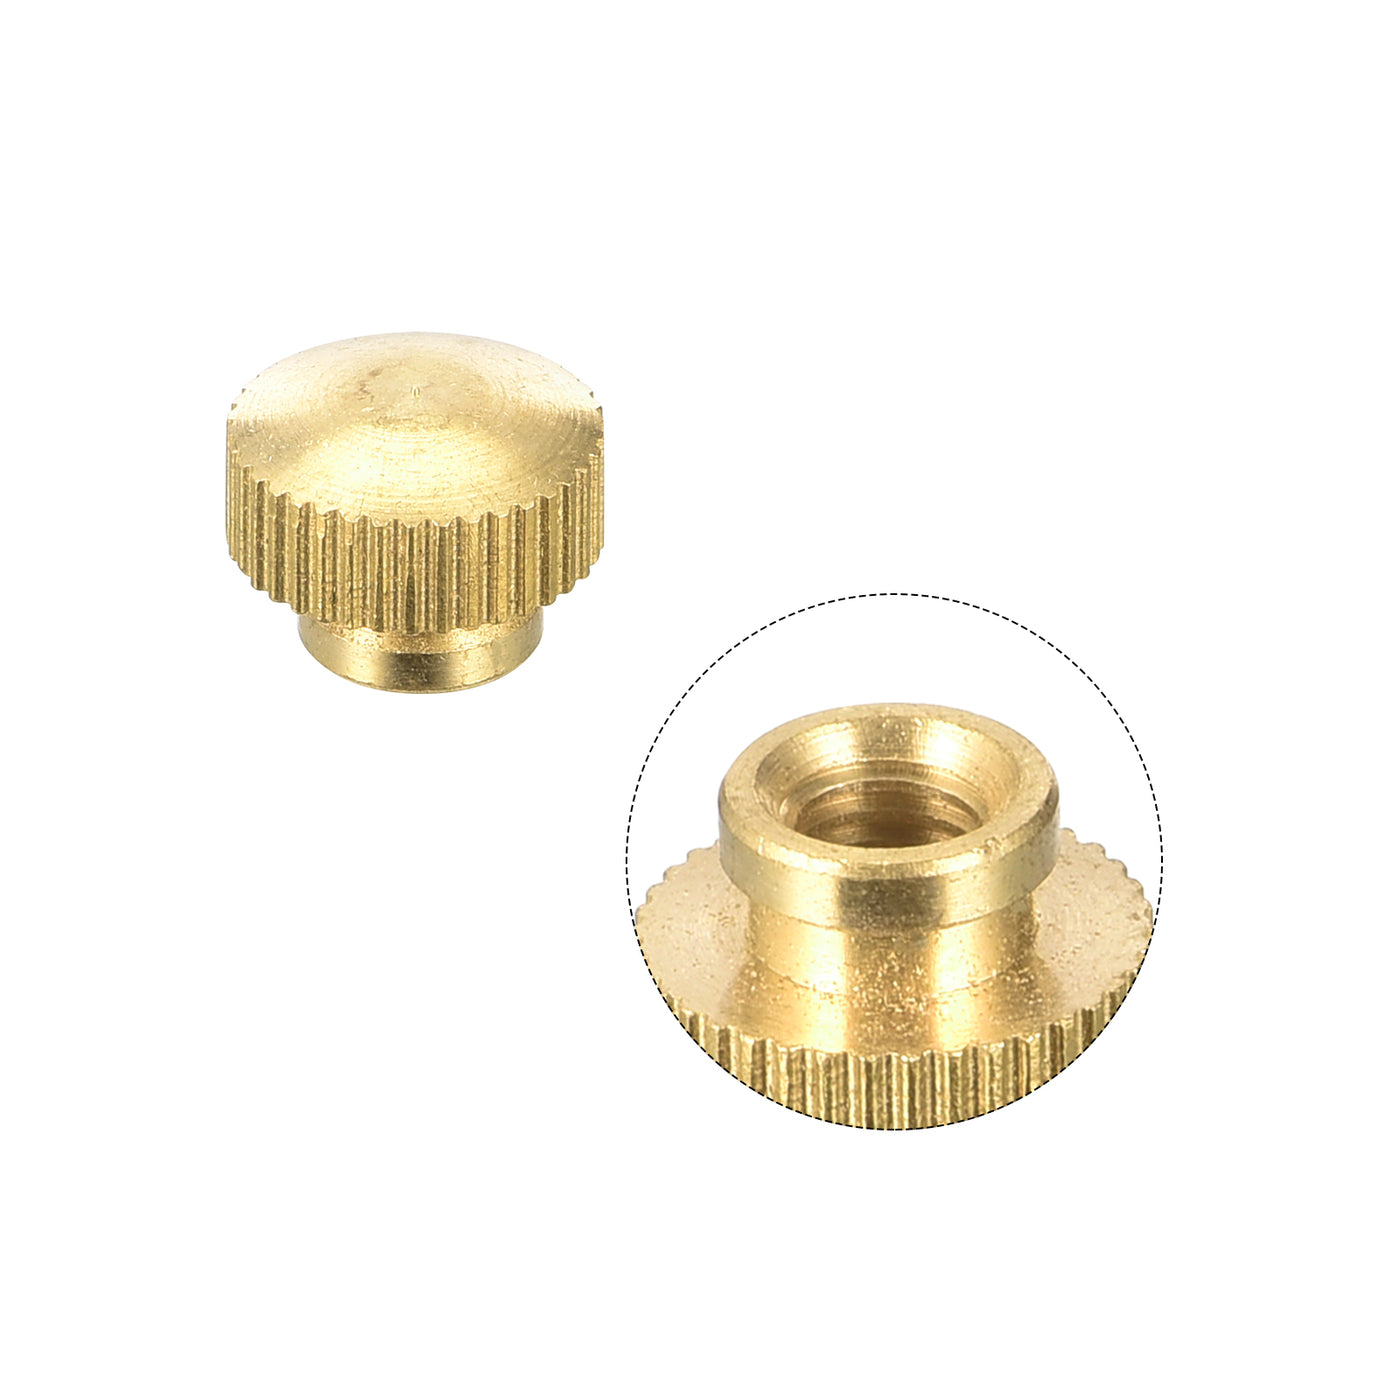 uxcell Uxcell Brass Knurled Thumb Nuts, M5x0.8mm Round Stepped Knobs Fasteners for 3D Printer, Electronic Equipment 4Pcs